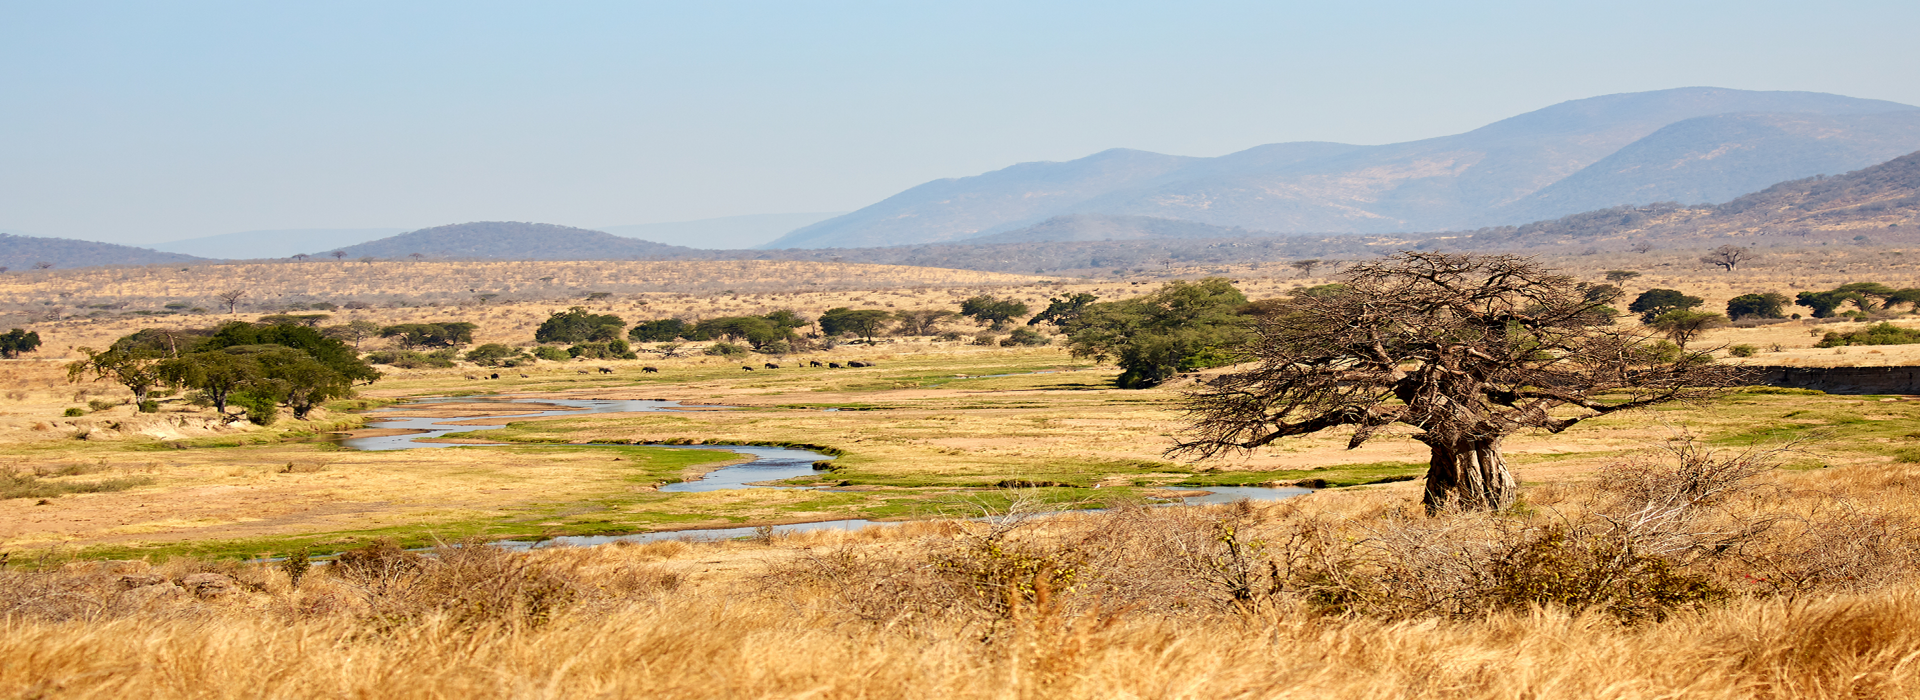 Background Image for Ruaha National Park